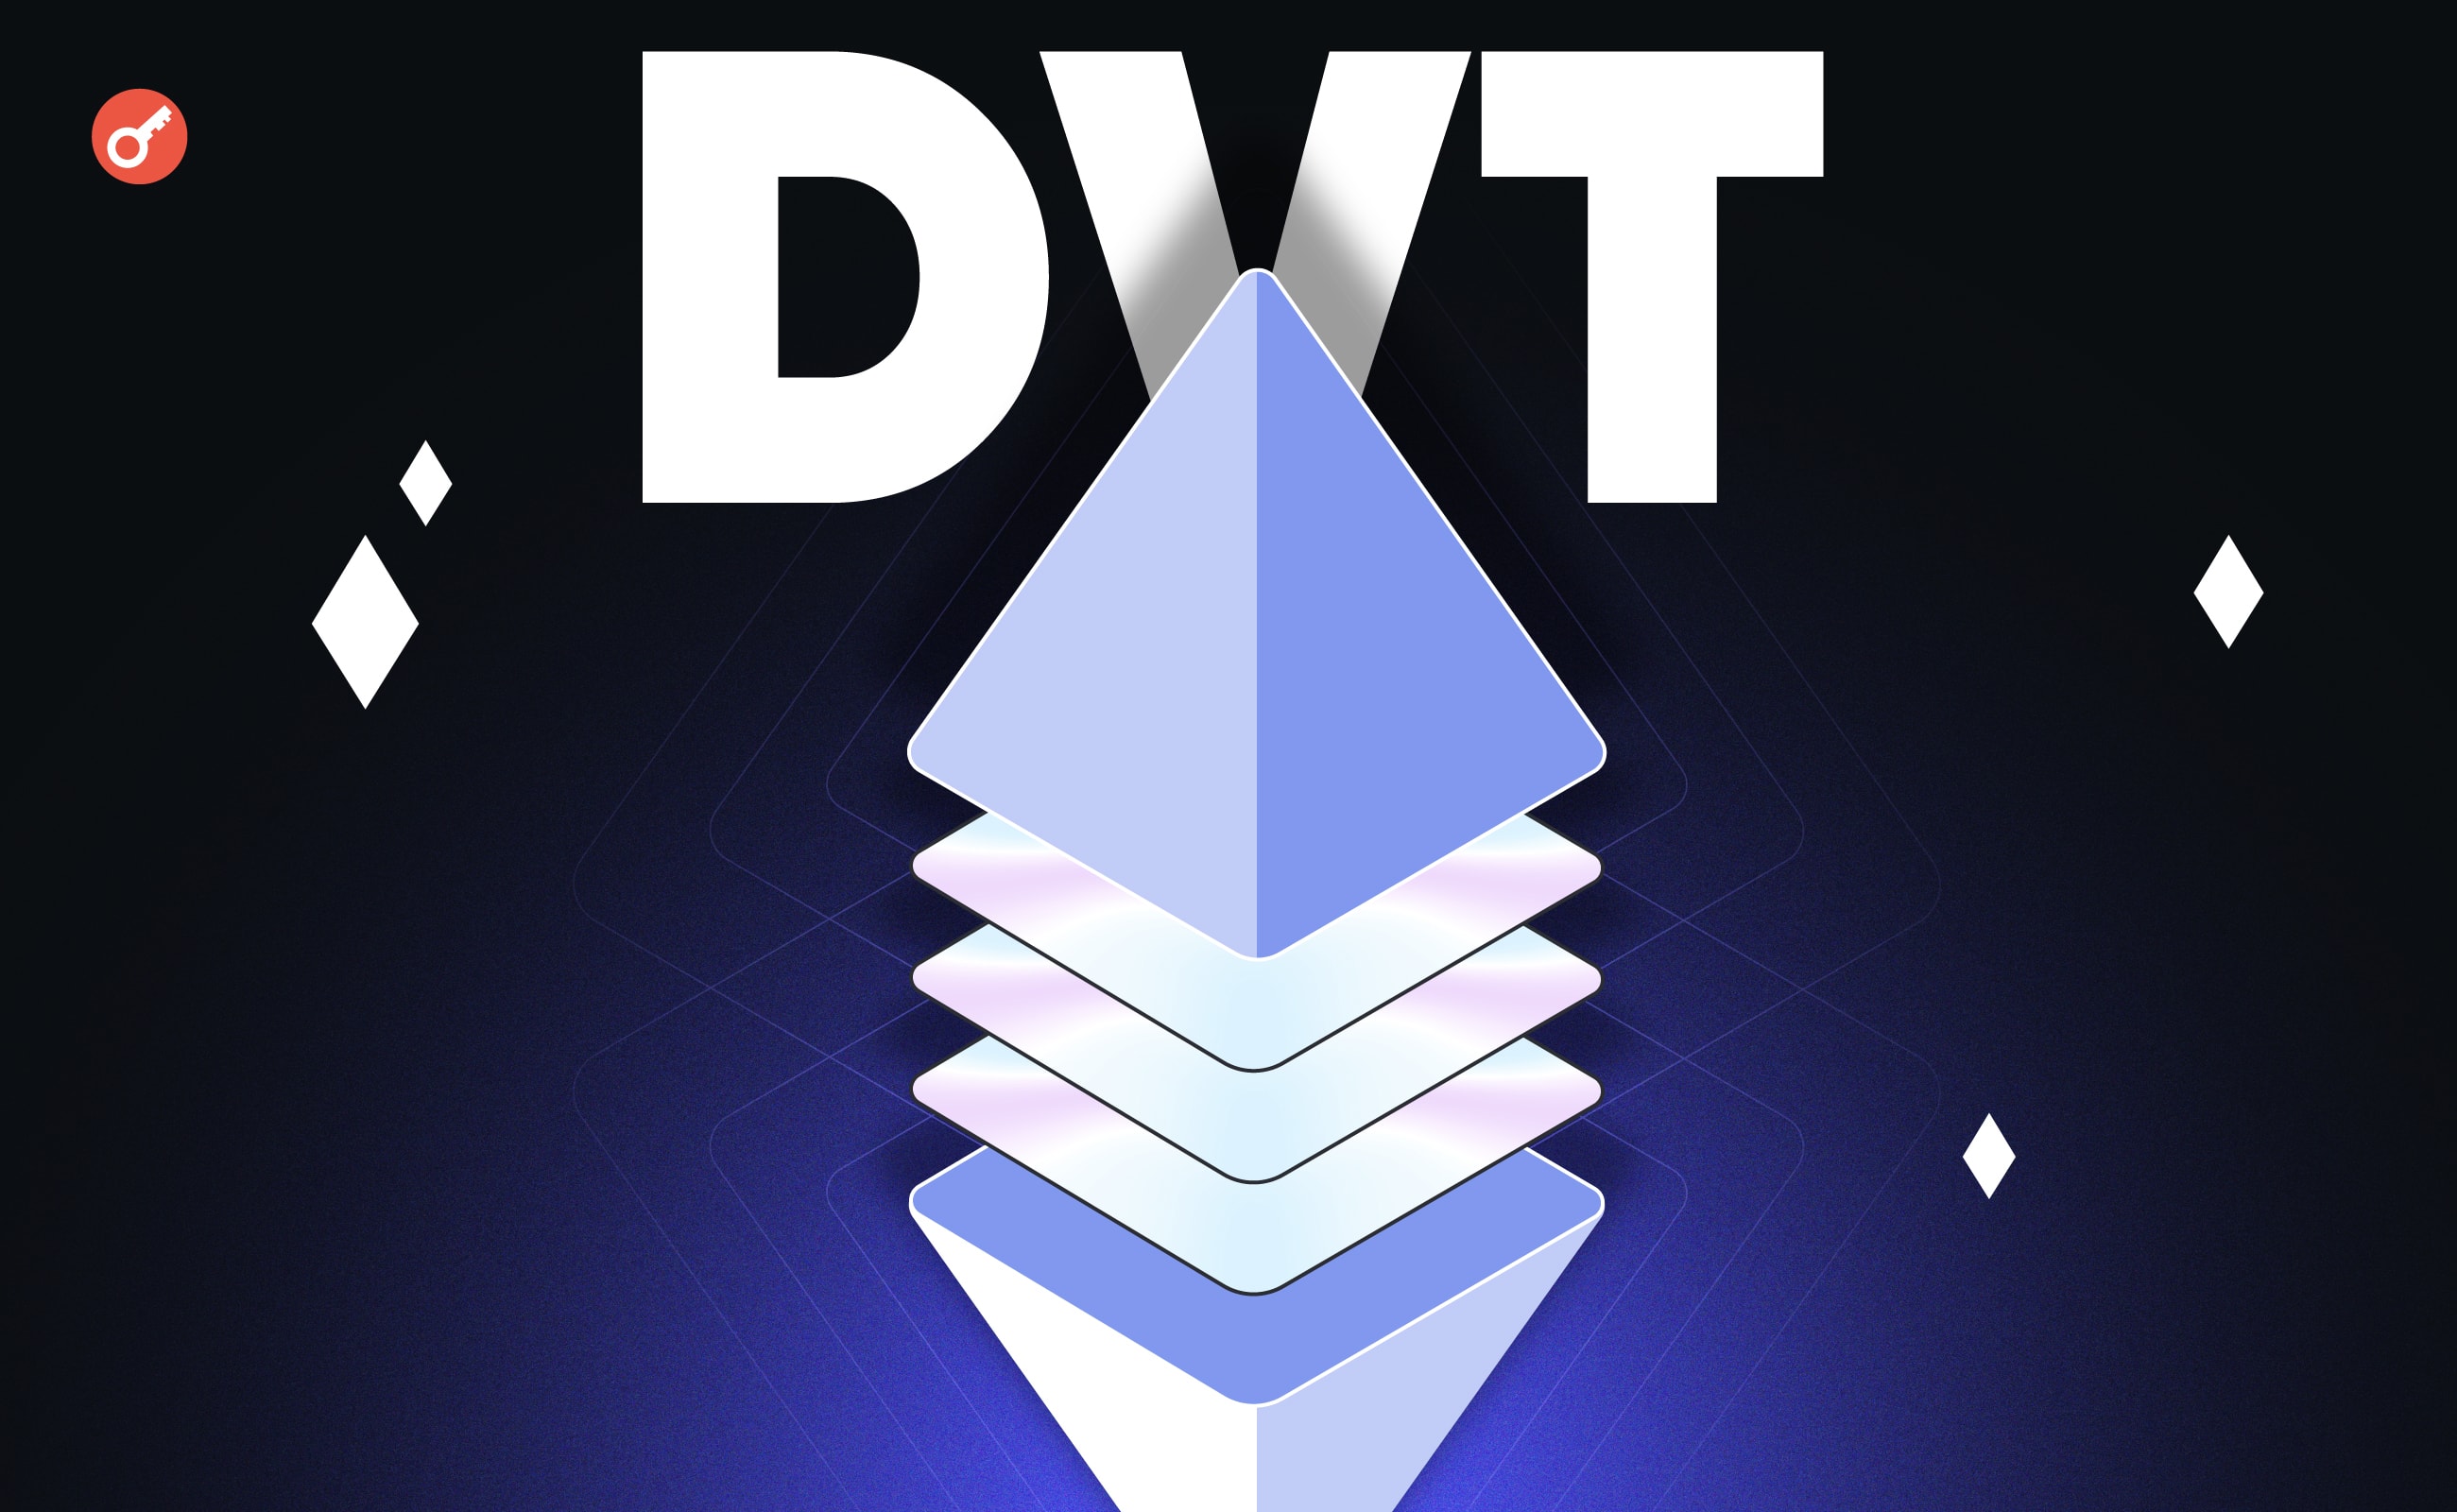 Multi-level Decentralization: What is DVT and How Can This Technology Help Ethereum? Заглавный коллаж статьи.